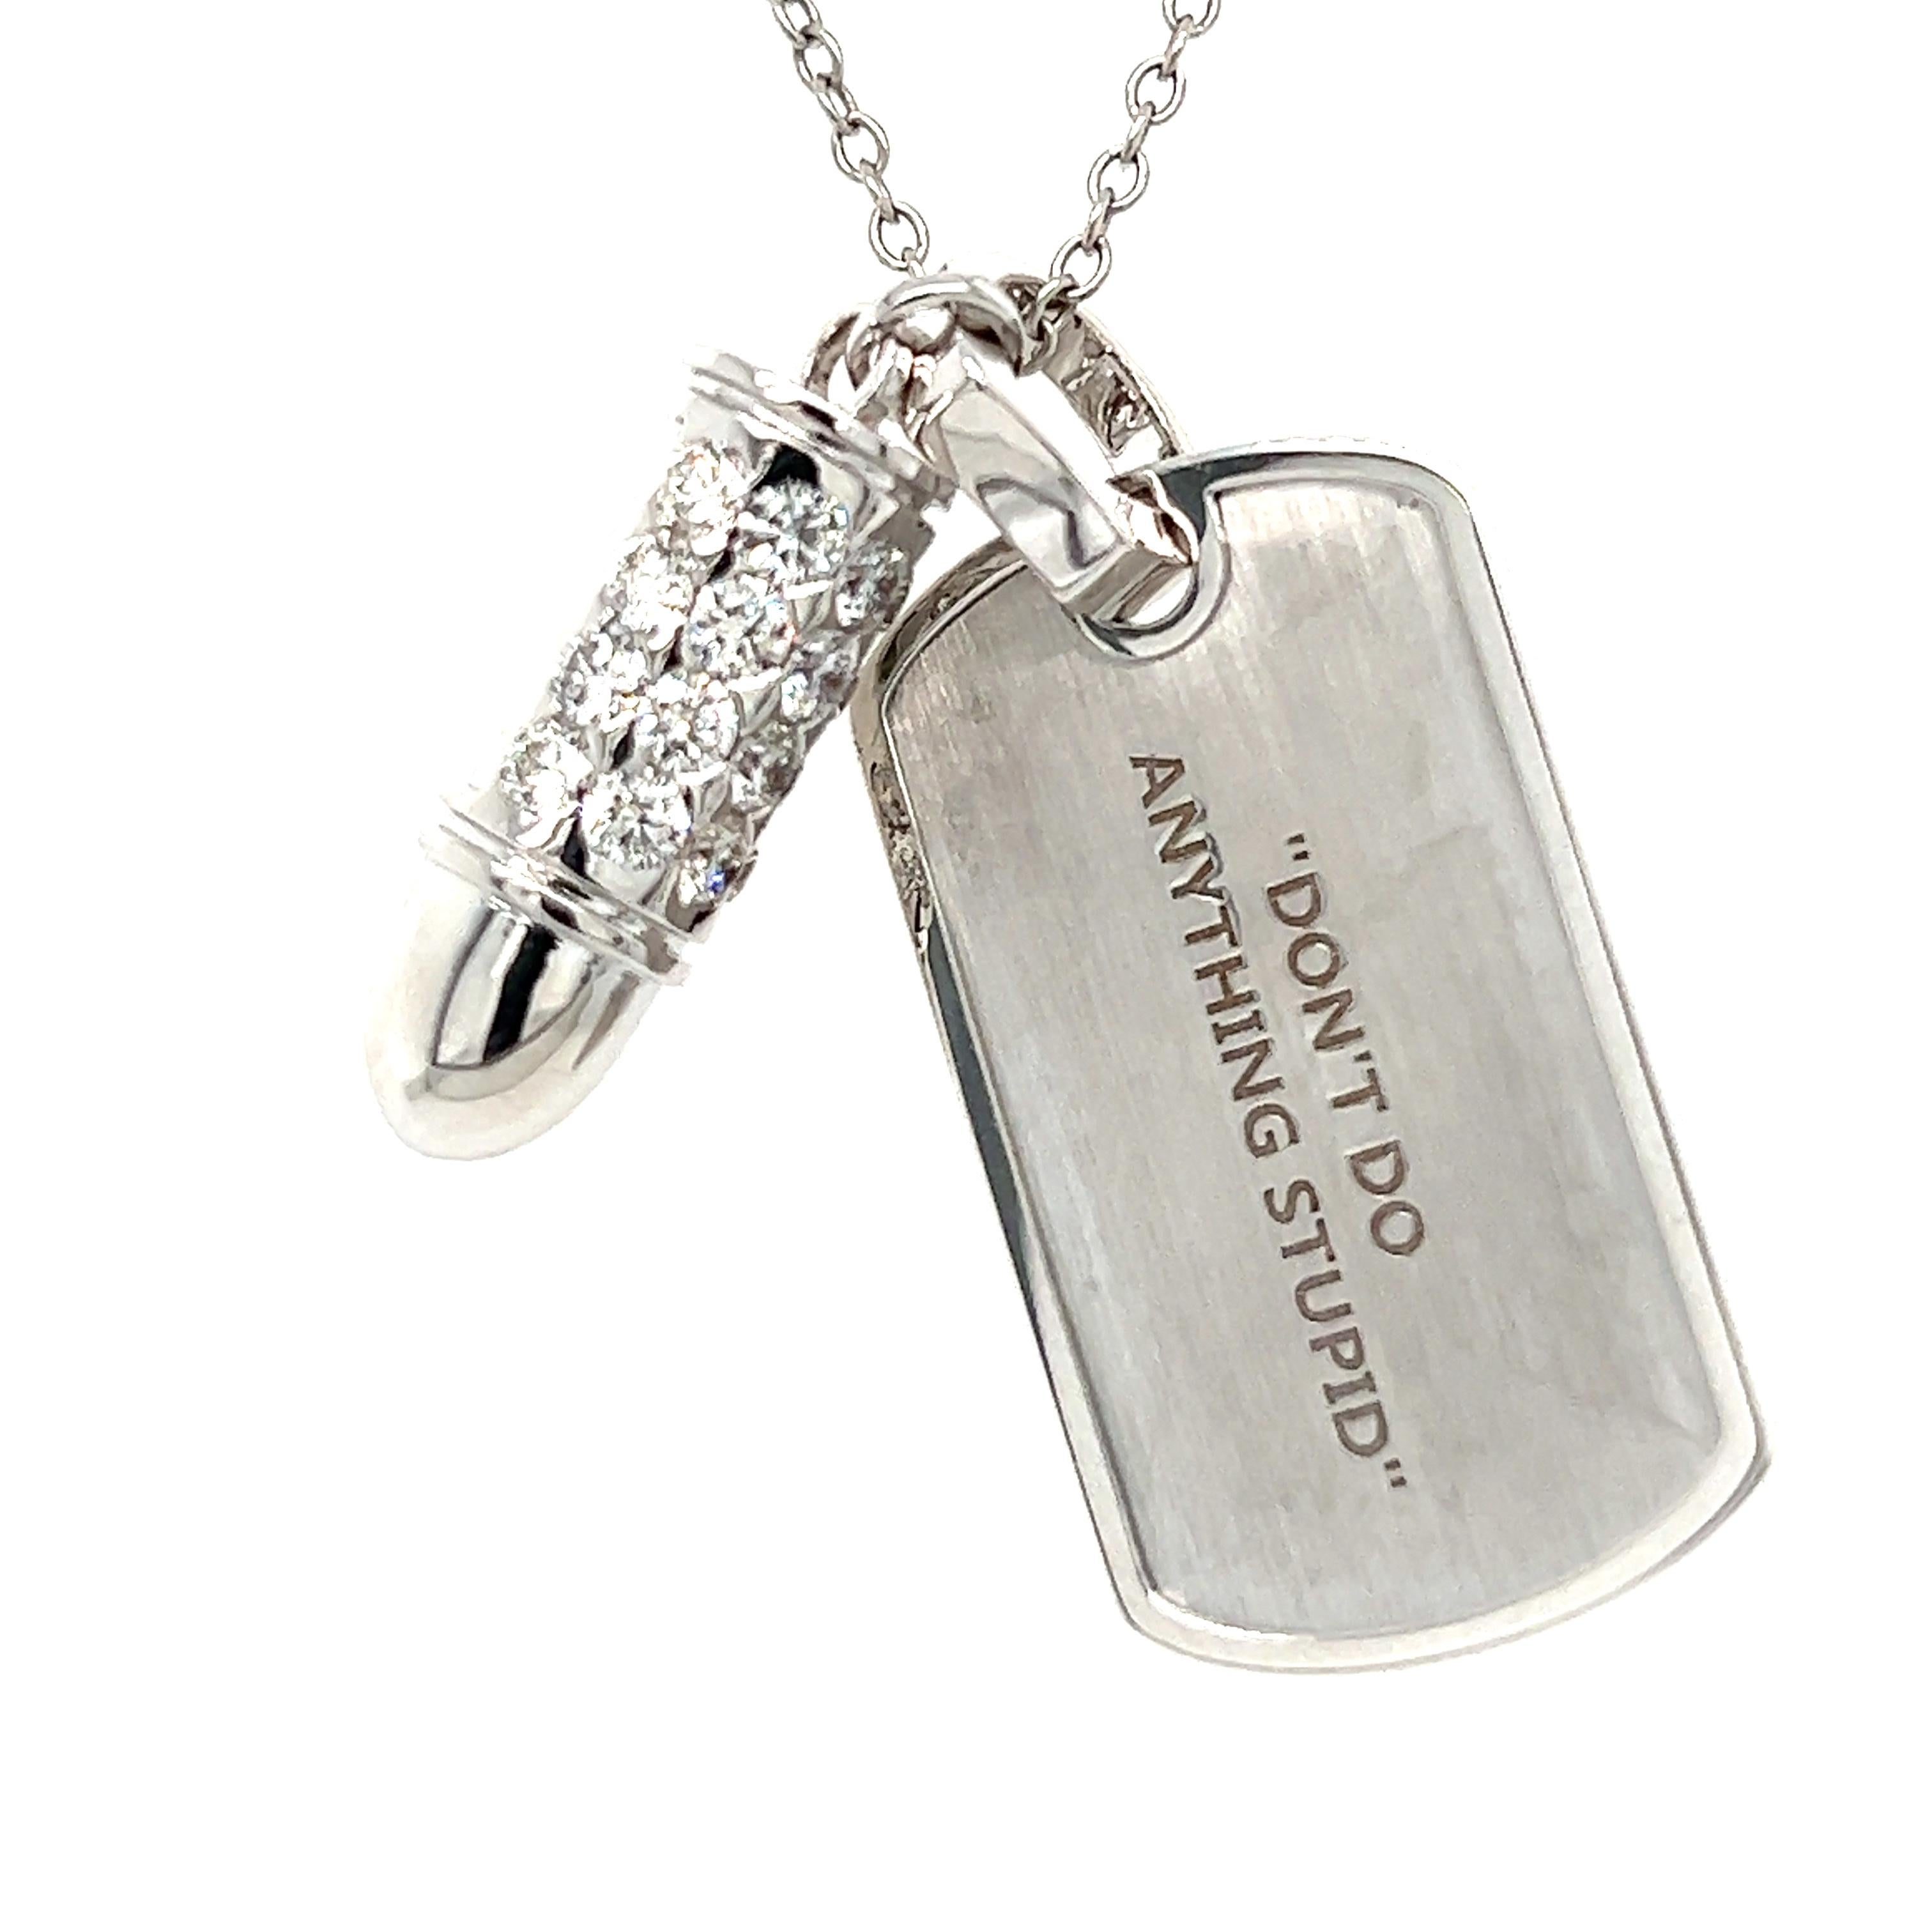 Pendant with Diamonds Bullet in 18K White Gold 
no chain included
16 Diamonds -  1.18 CT
18K White Gold - 10.78 GM 

one piece only